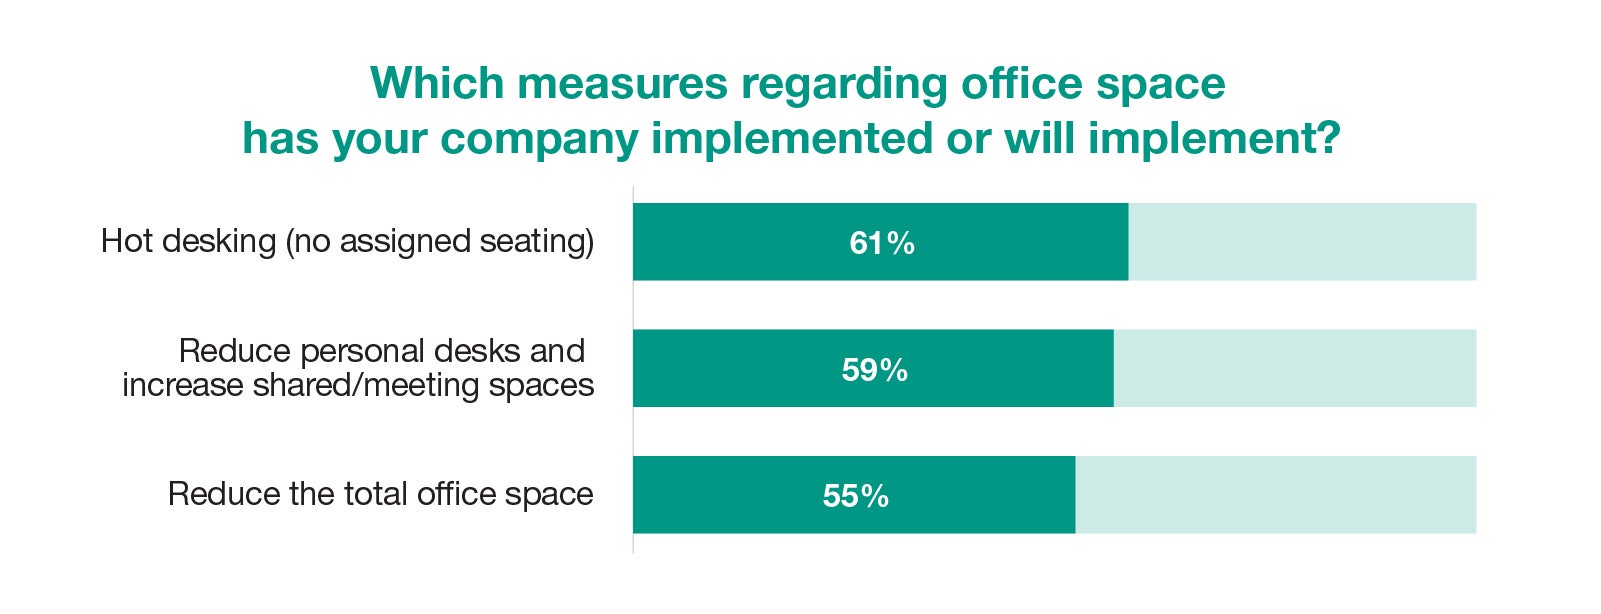 which measures regarding office space has your company implemented or will implement?